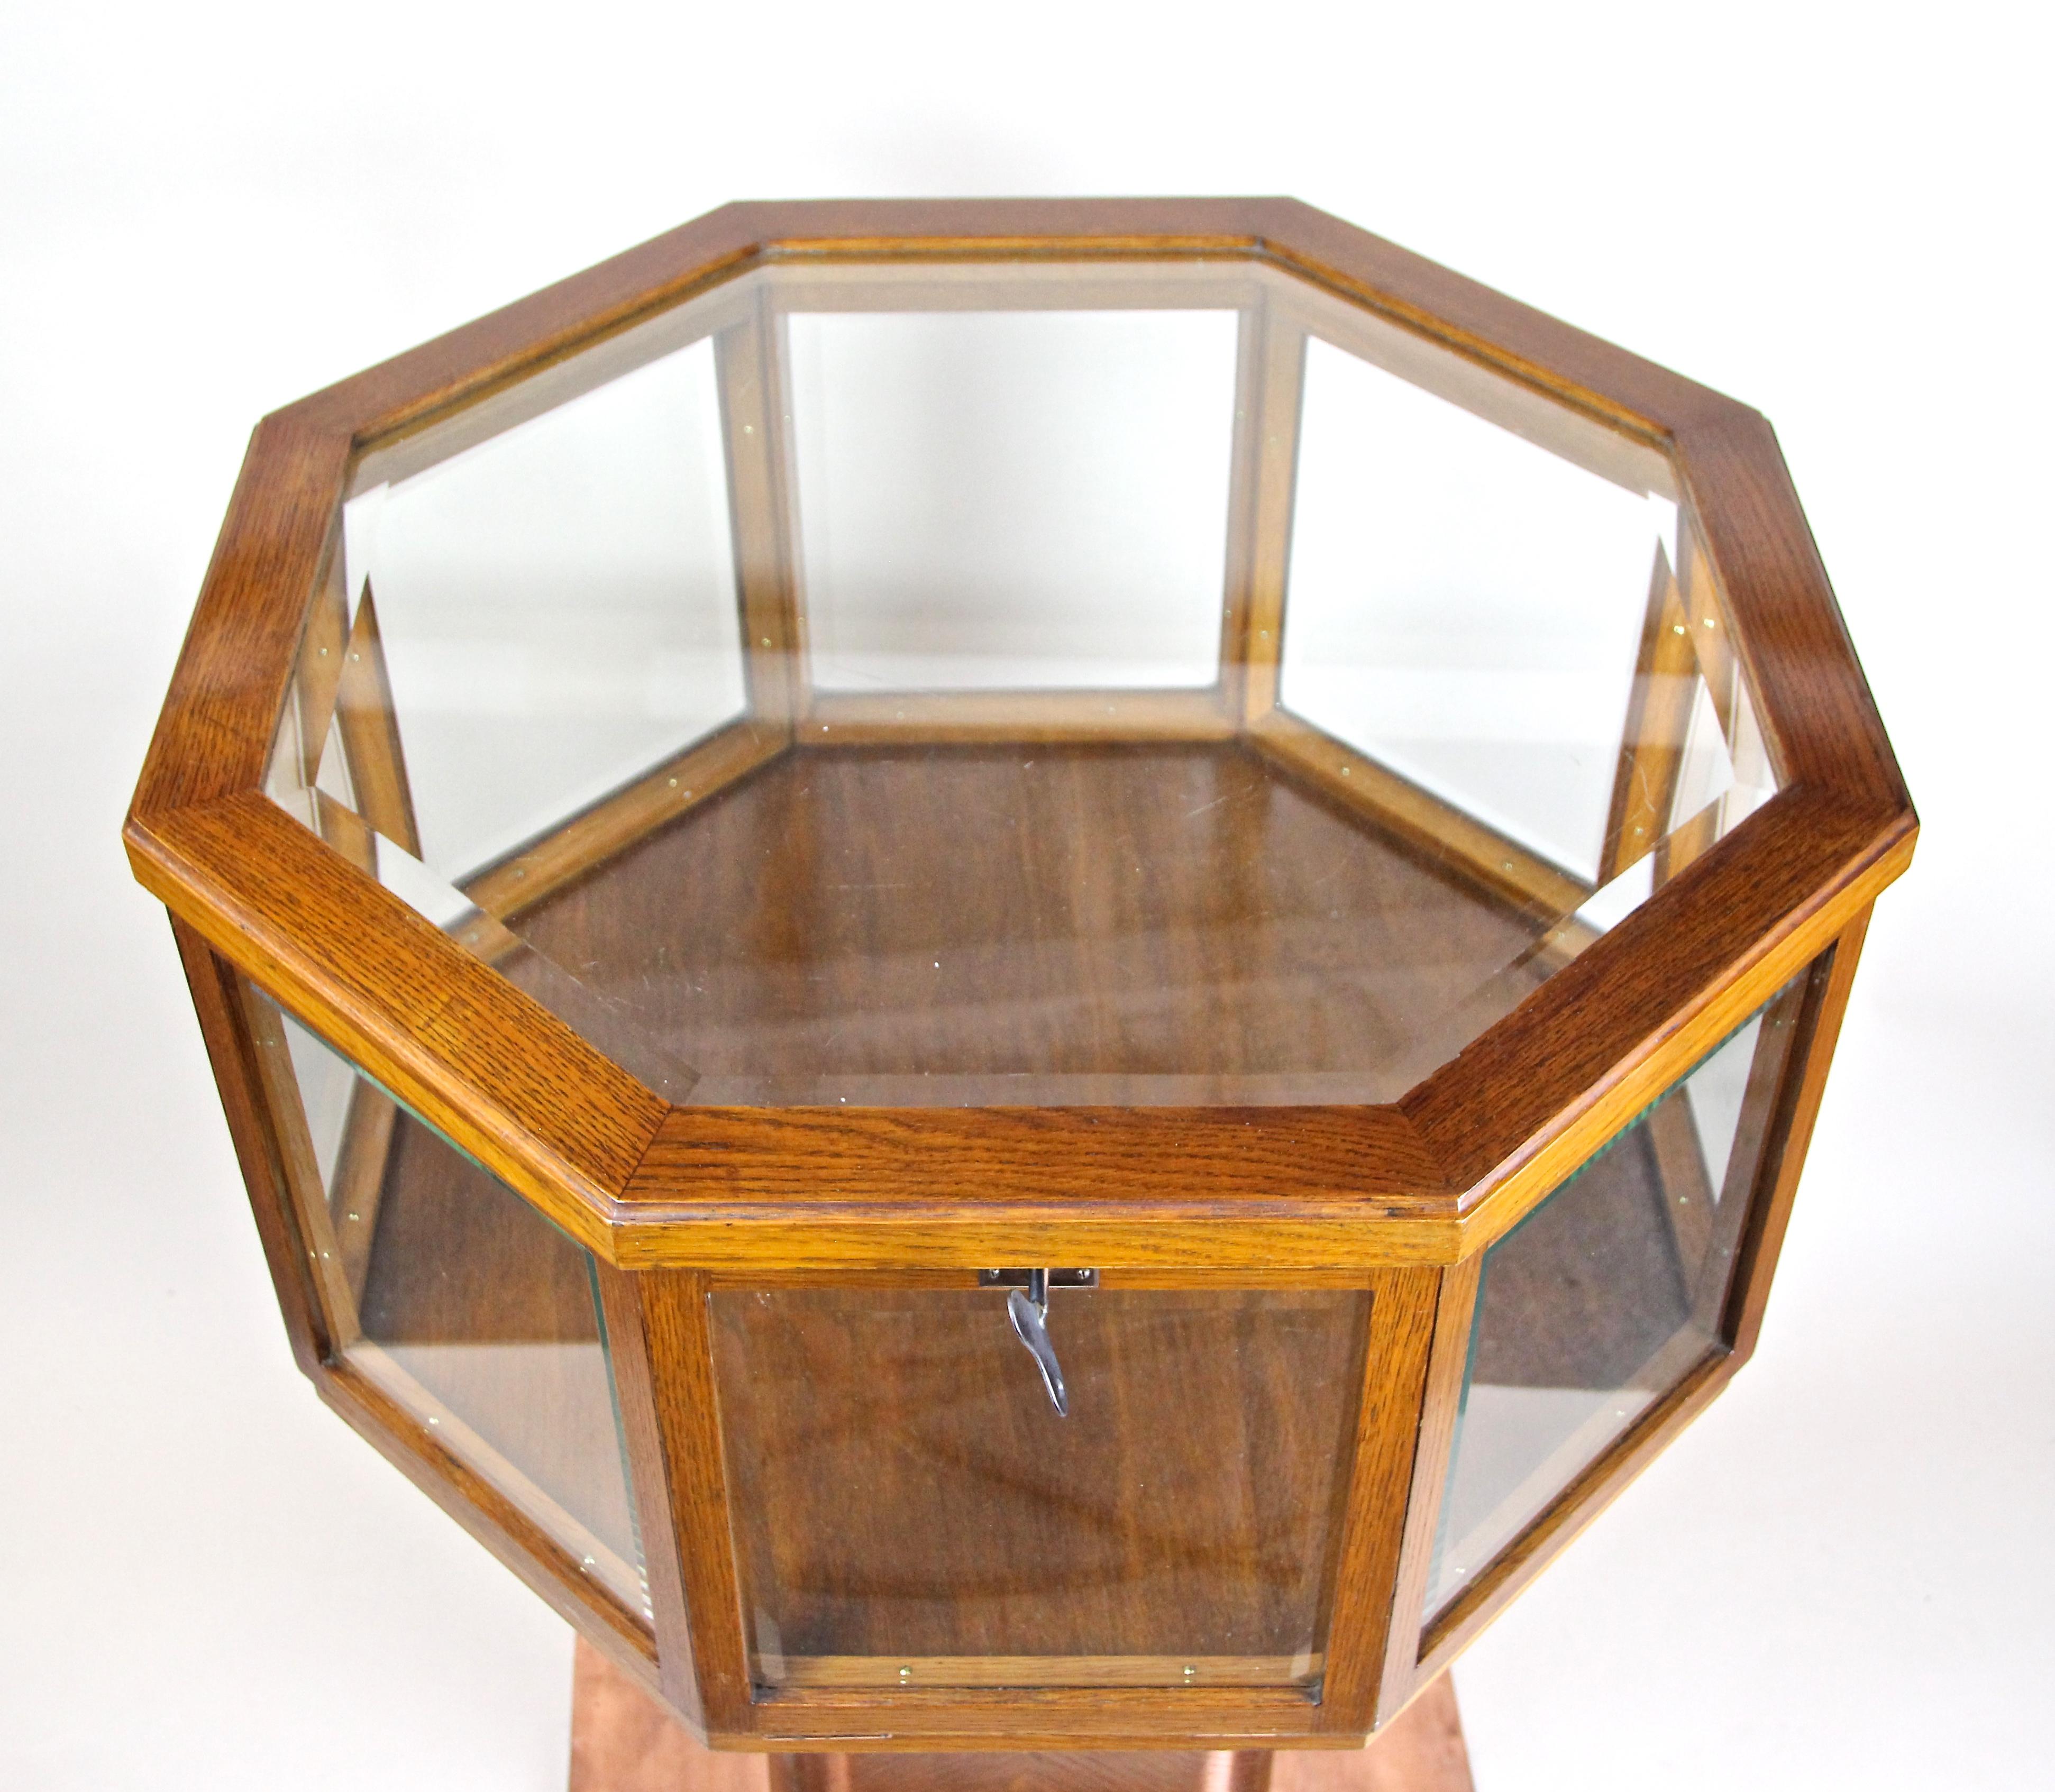 Extraordinary Art Nouveau vitrine table or display table from the early period in Austria, circa 1900. The great designed oakwood vitrine table shows an octagonal shaped upper part, still holding the original facet cut glass panels. Sitting on a